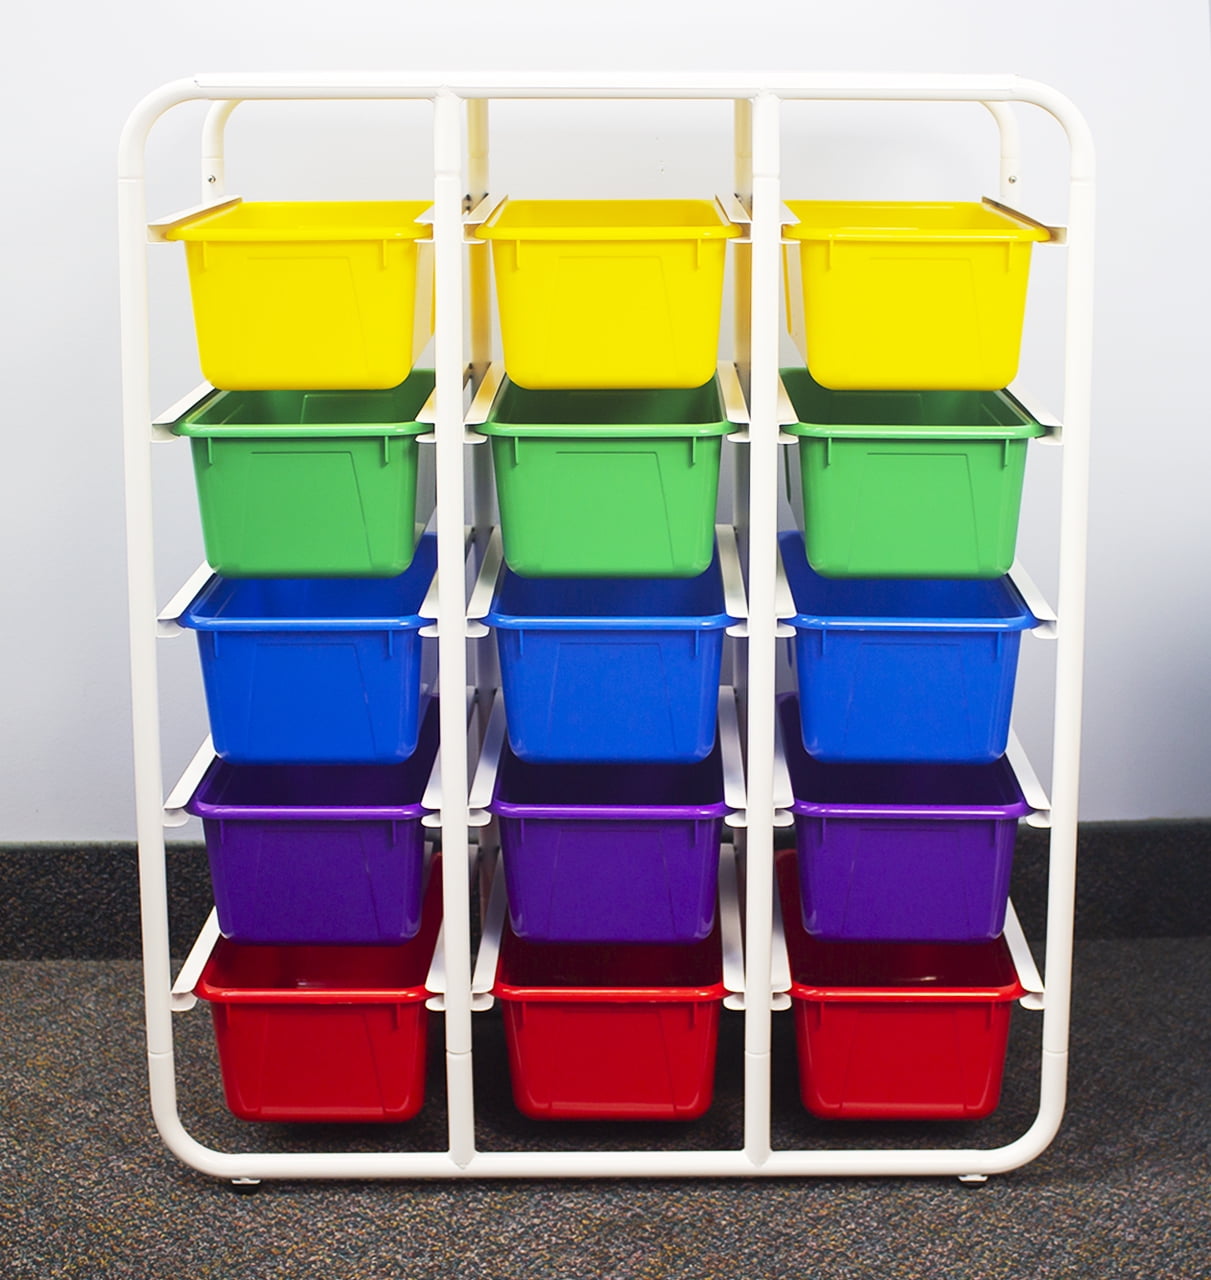 Storex Metal Storage Rack for Kids with 12 Plastic Cubby Bins, Assorted  Colors 